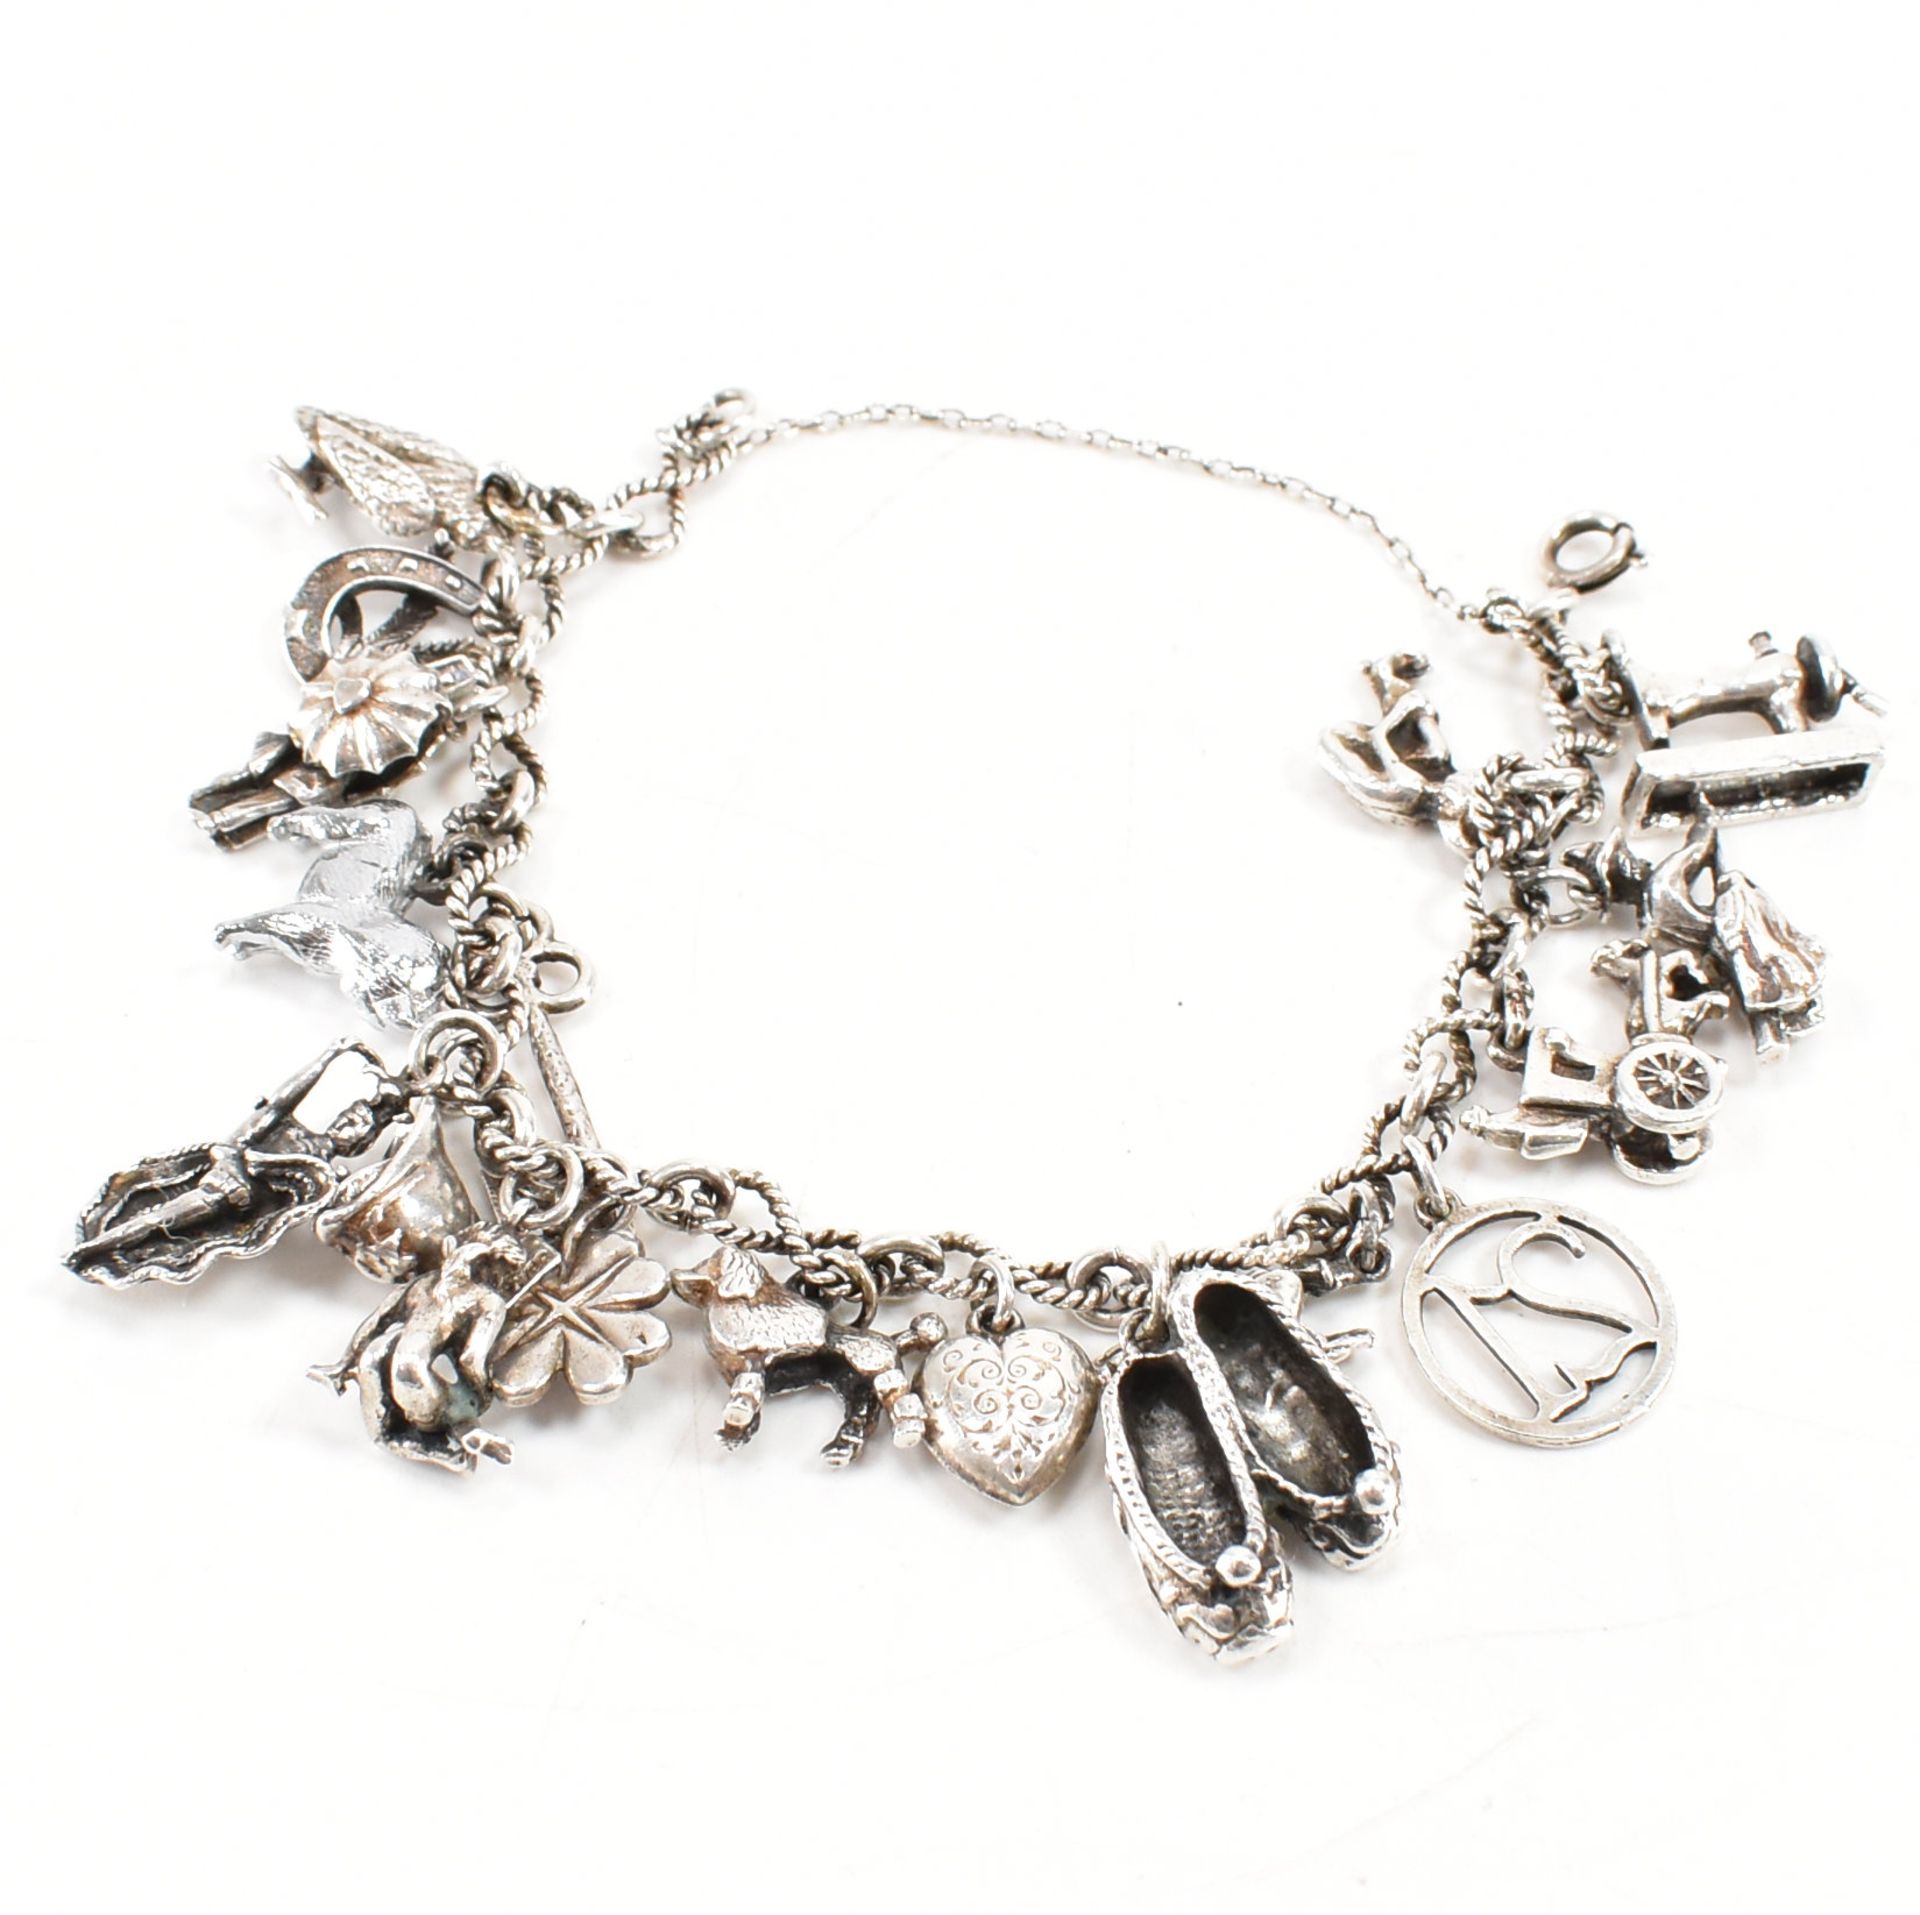 VINTAGE SILVER CHARM BRACELET WITH CHARMS - Image 4 of 4